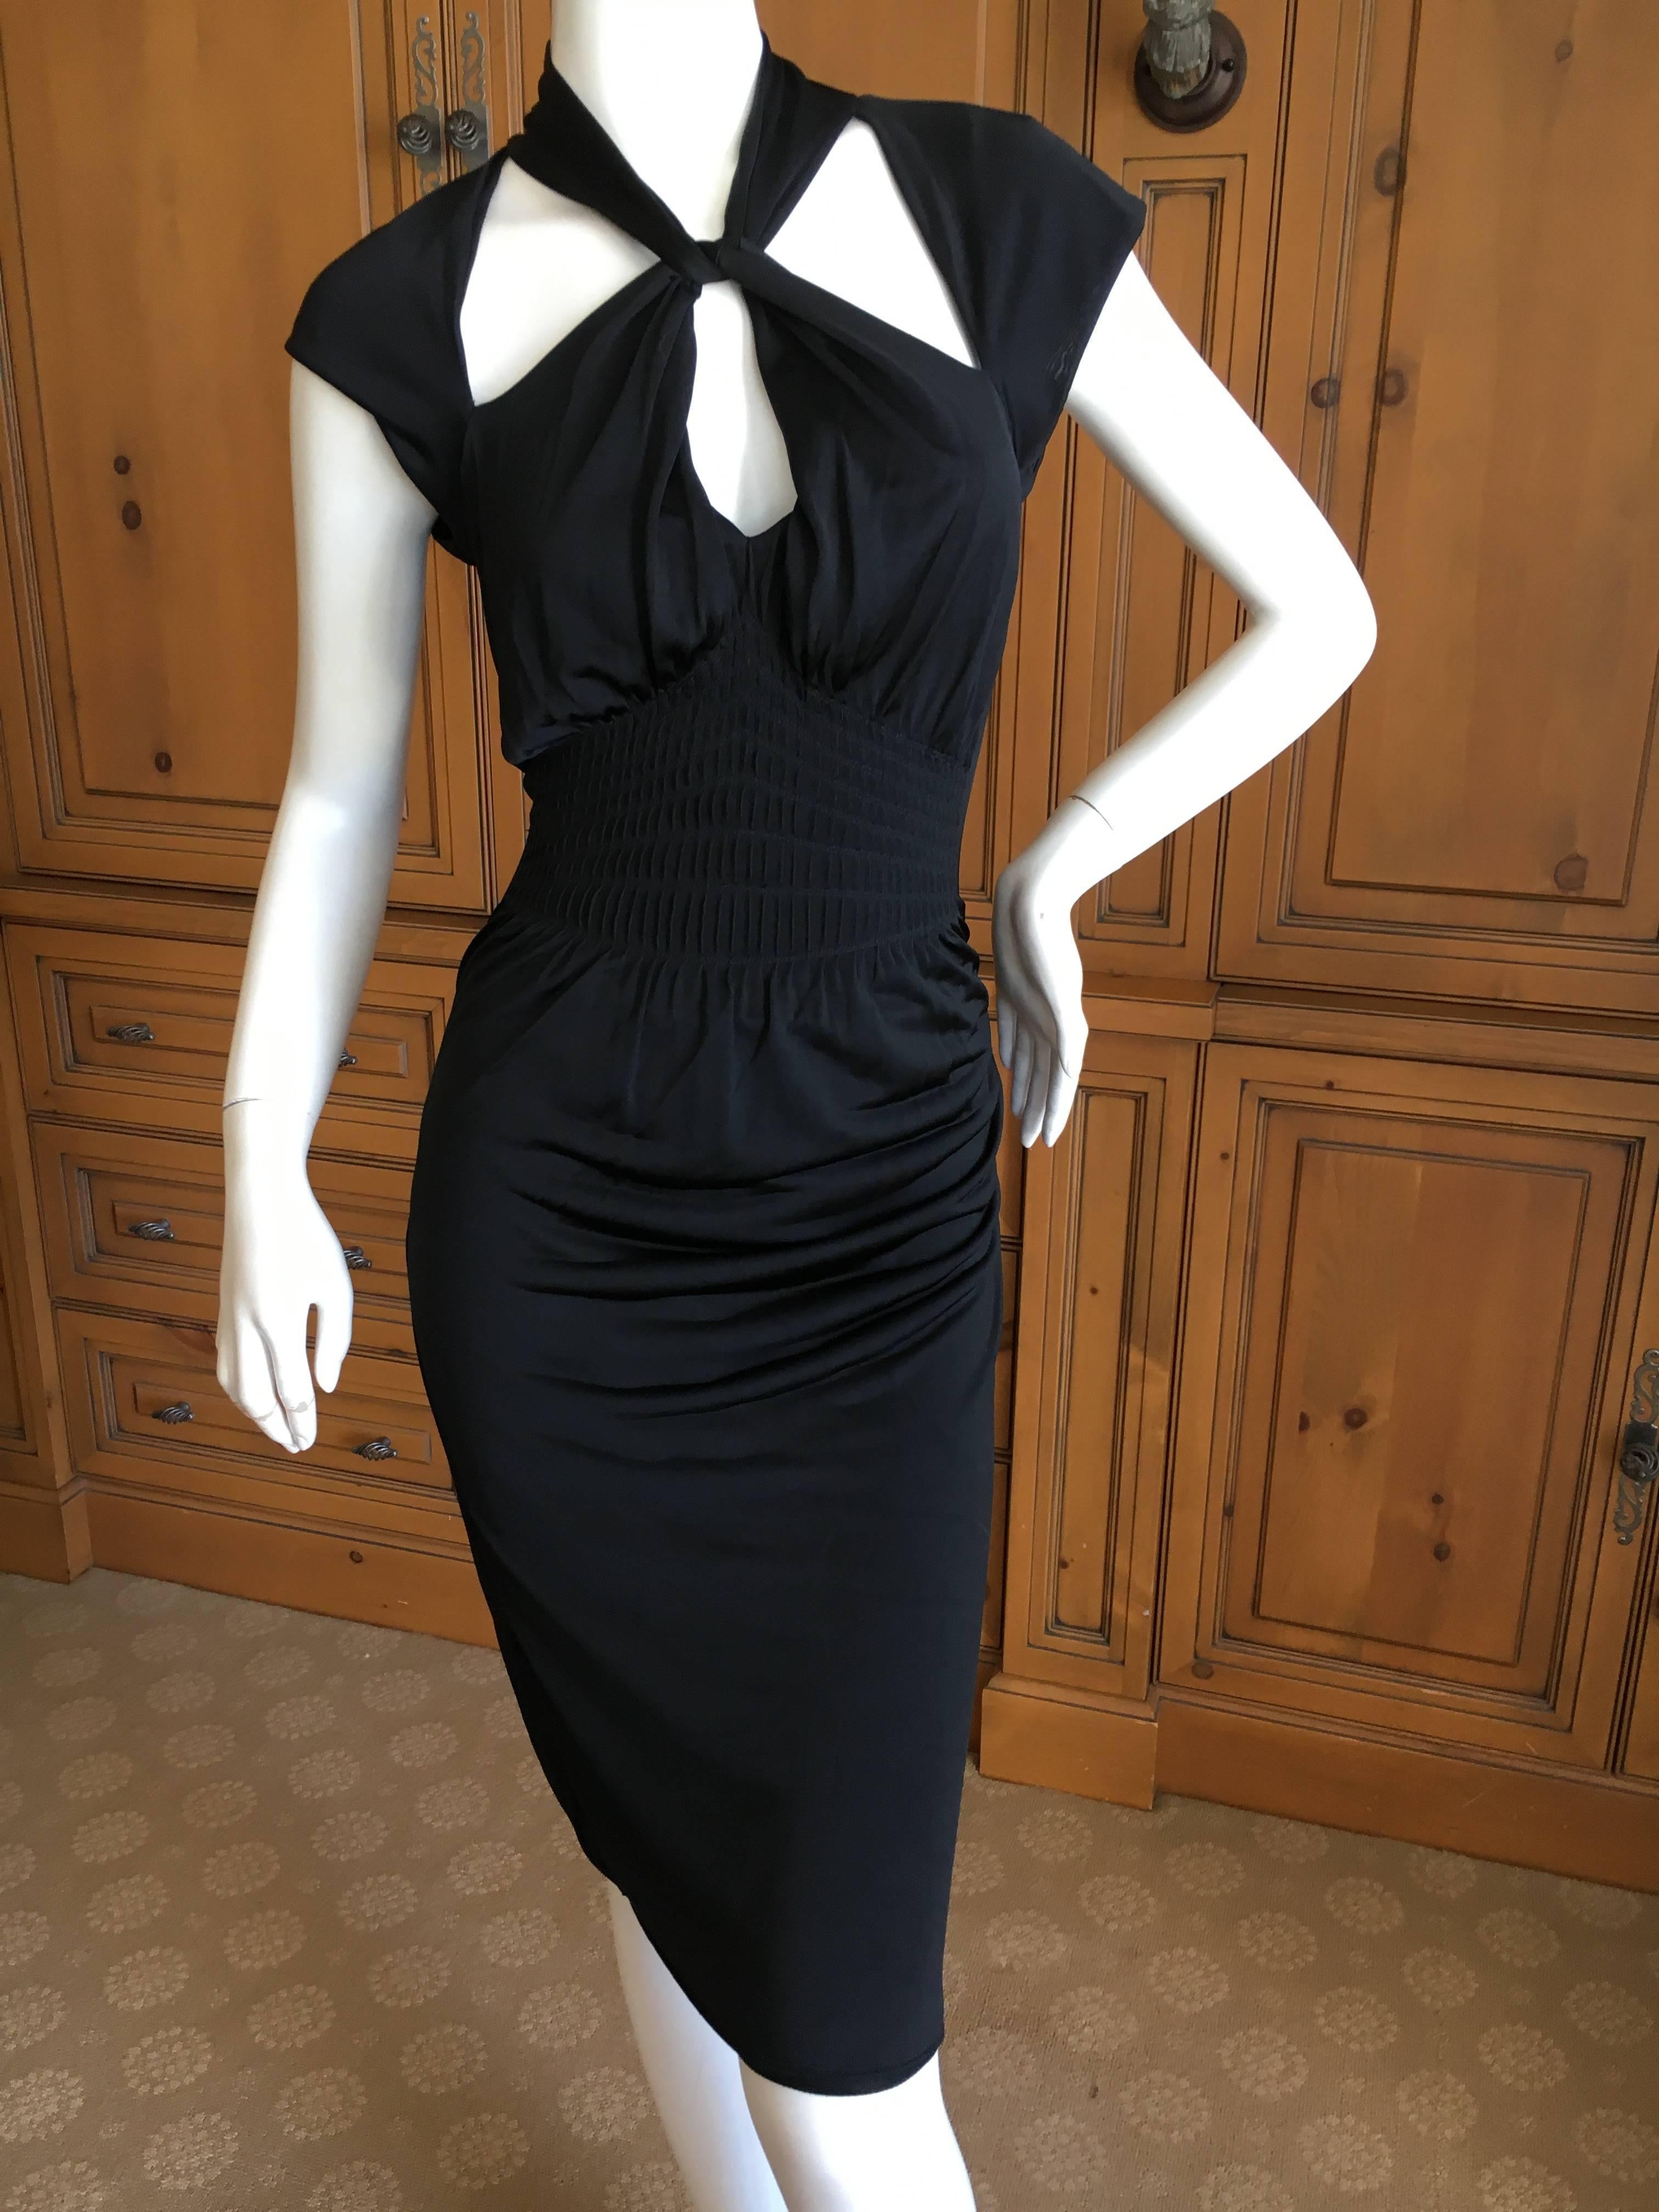 Gucci by Tom Ford Black Backless Knot Dress.
This is classic Tom Ford, sexy coming and going.
Size Large
Bust 38